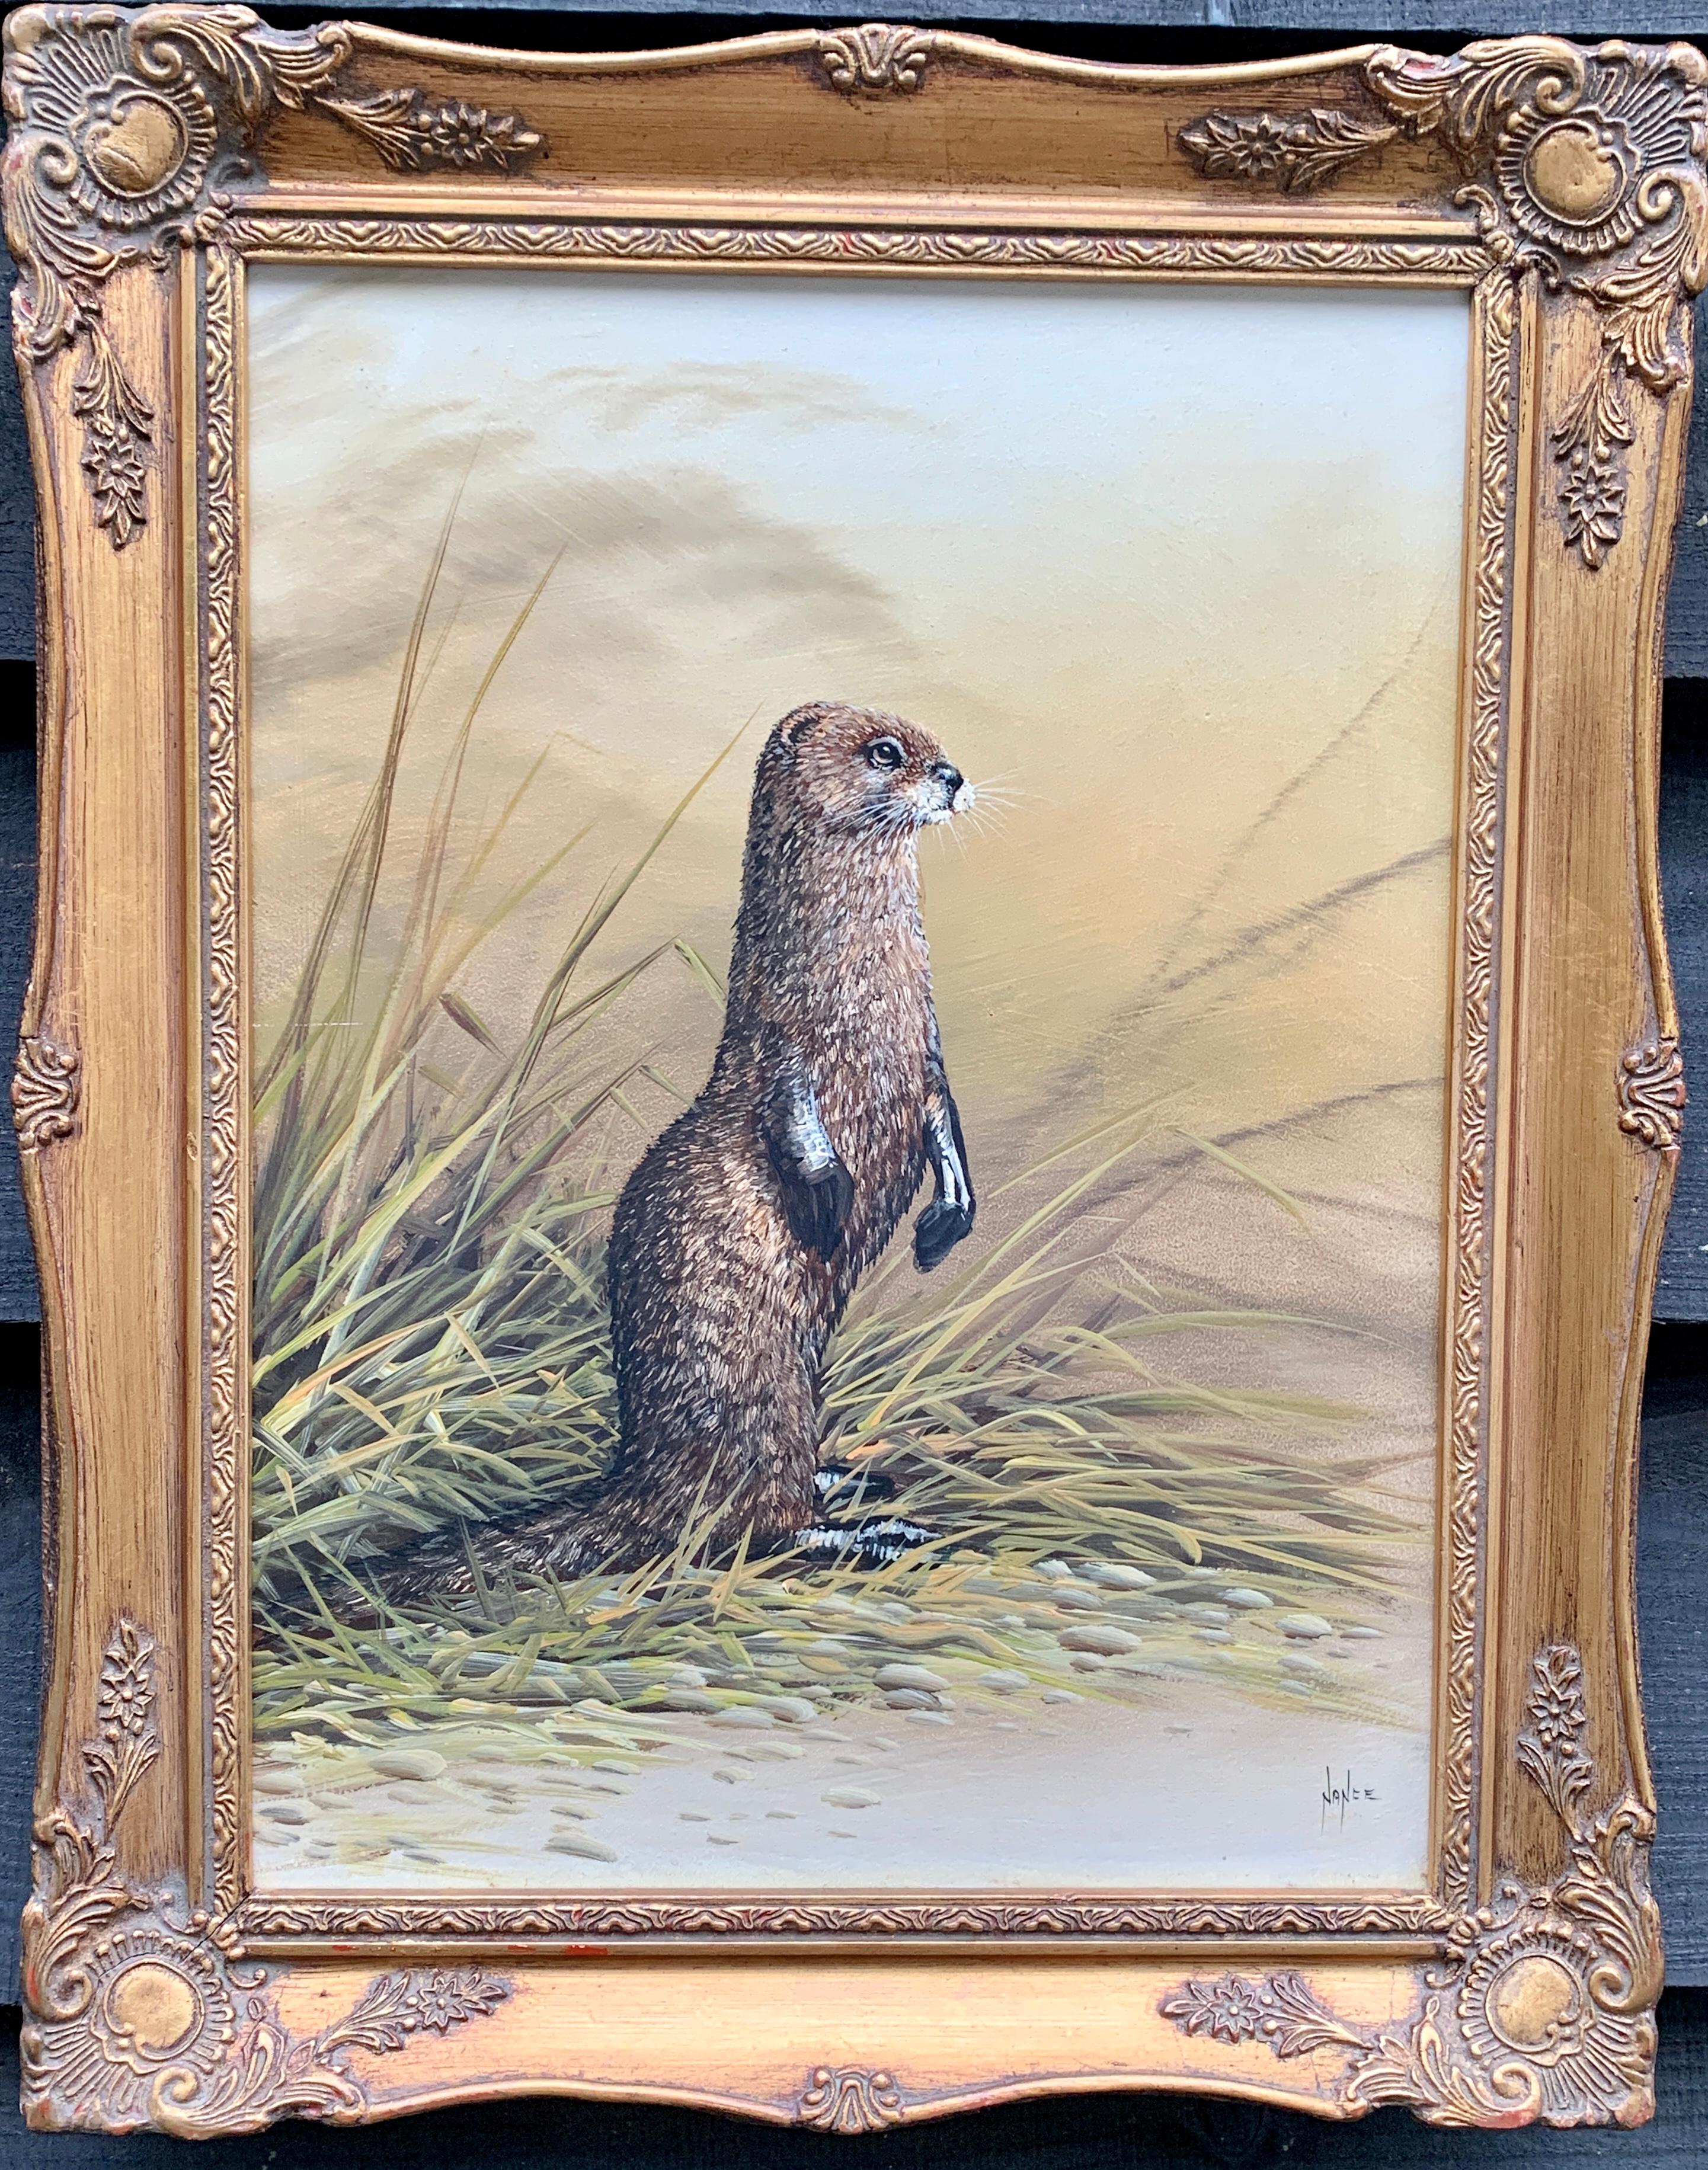 M.Naplee Animal Painting - Portrait of an English Brown and White Otter, on the banks of a River Landscape